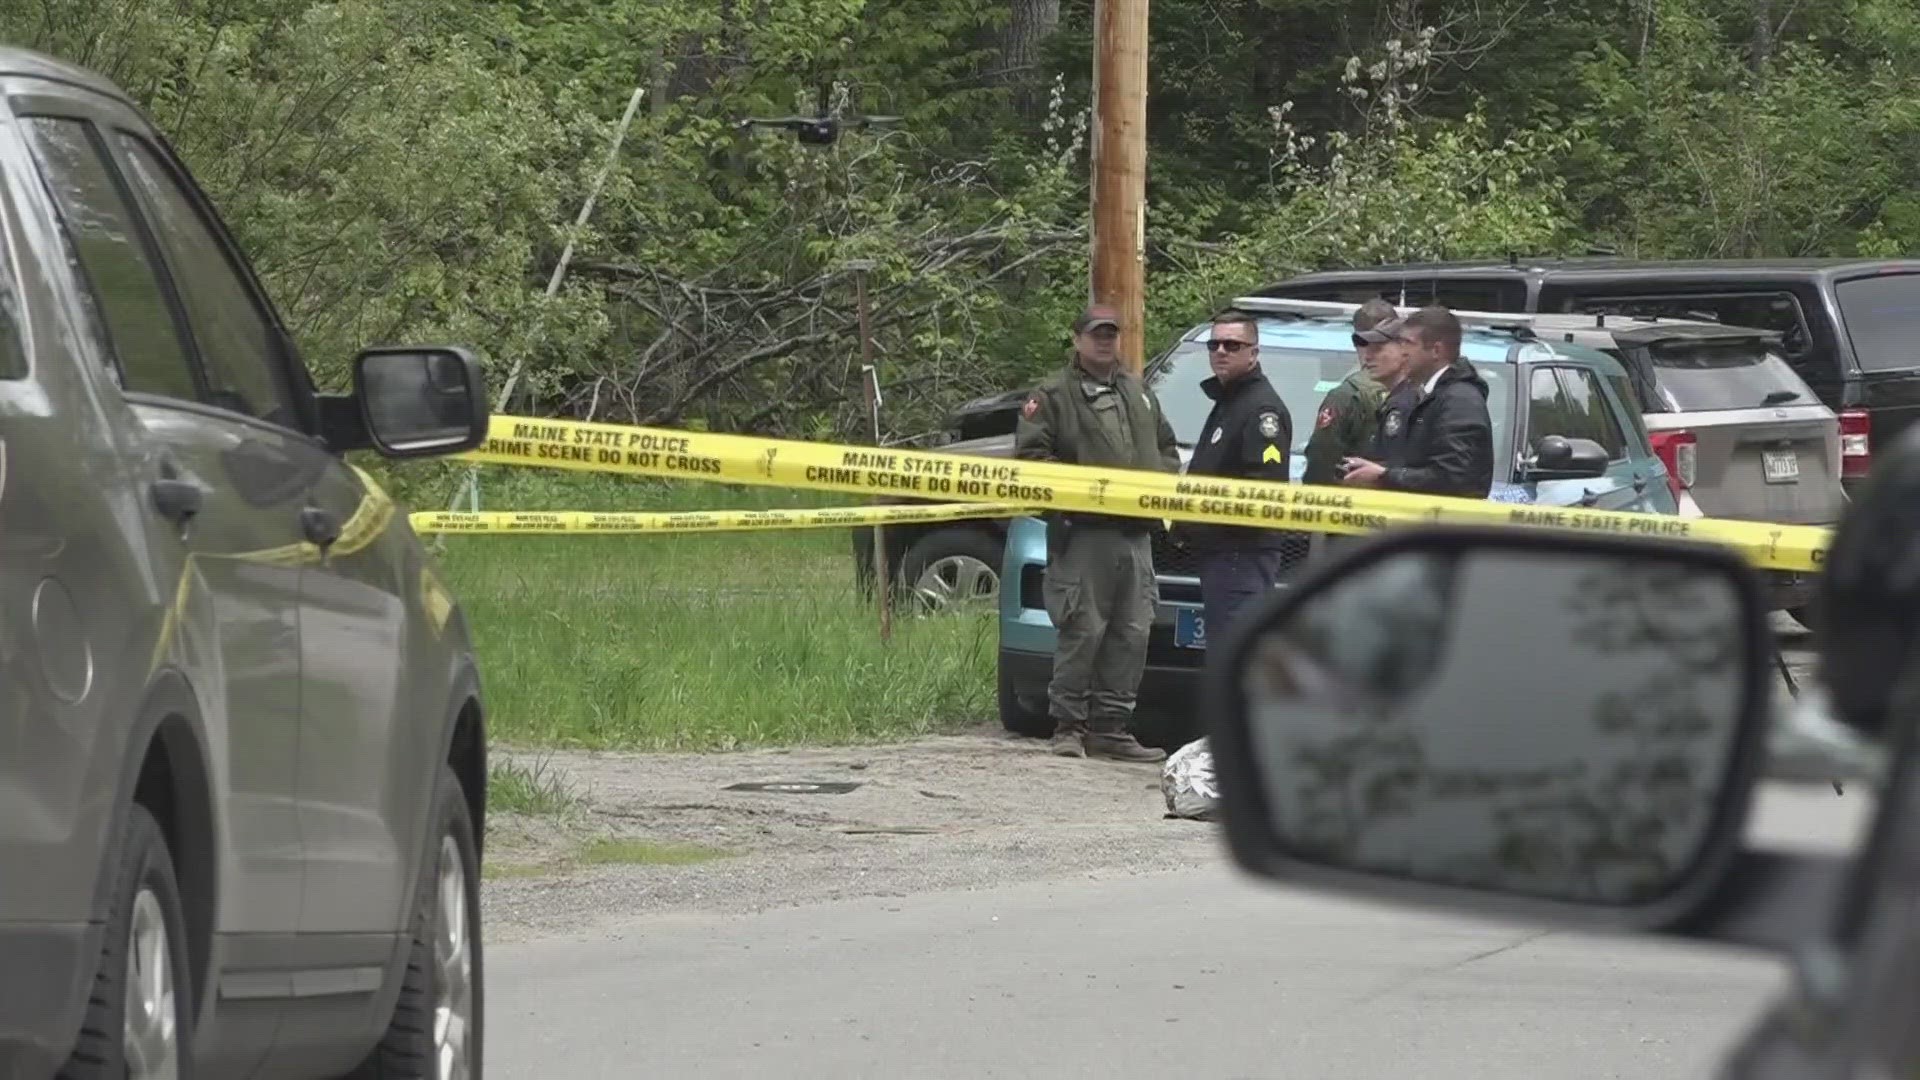 Little information has been released about the Maine State Police shooting that took place early Friday morning in Alton.